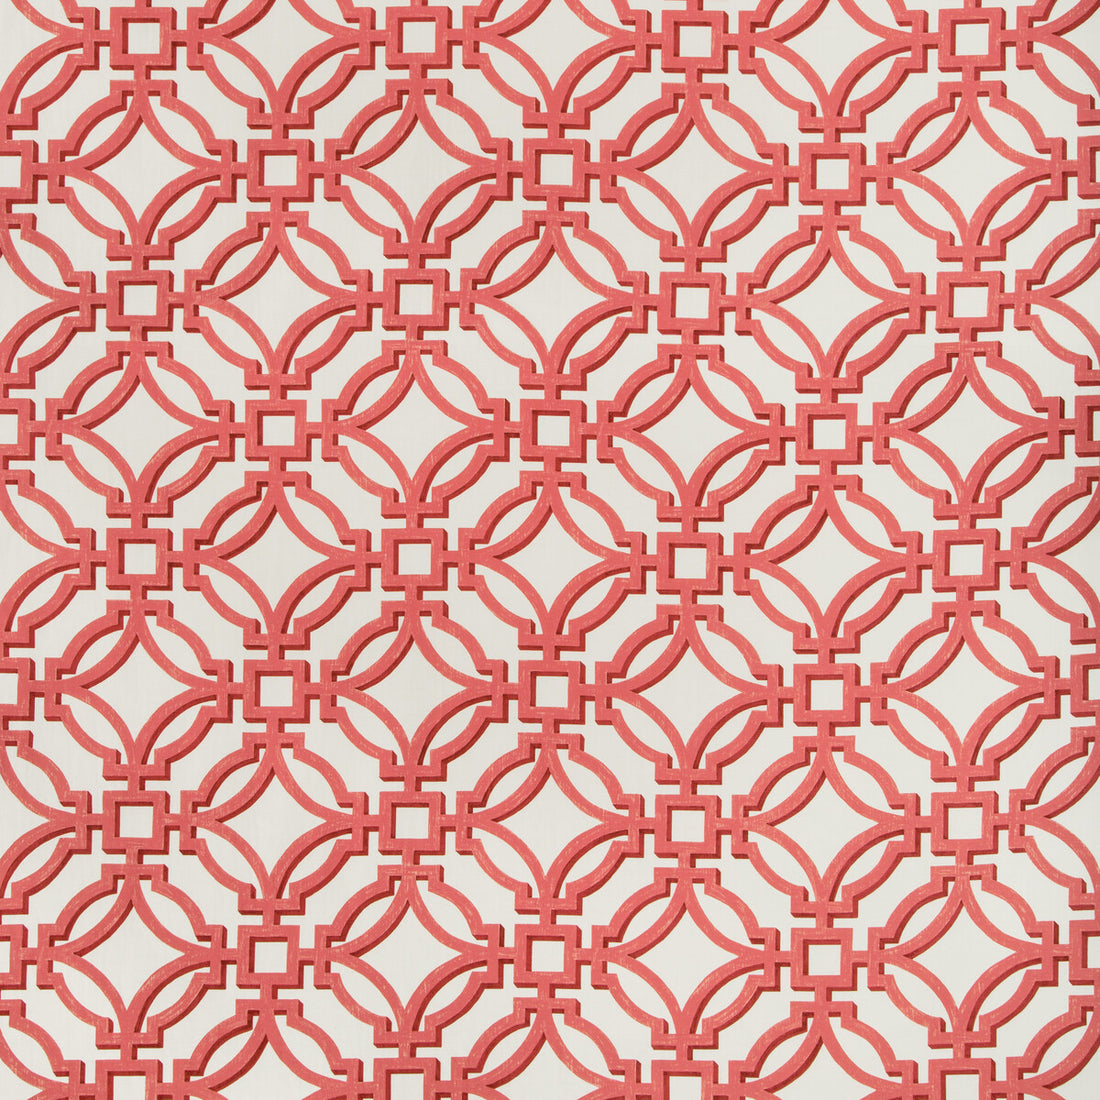 Salvy Print fabric in ruby color - pattern 8019136.19.0 - by Brunschwig &amp; Fils in the Summer Palace collection